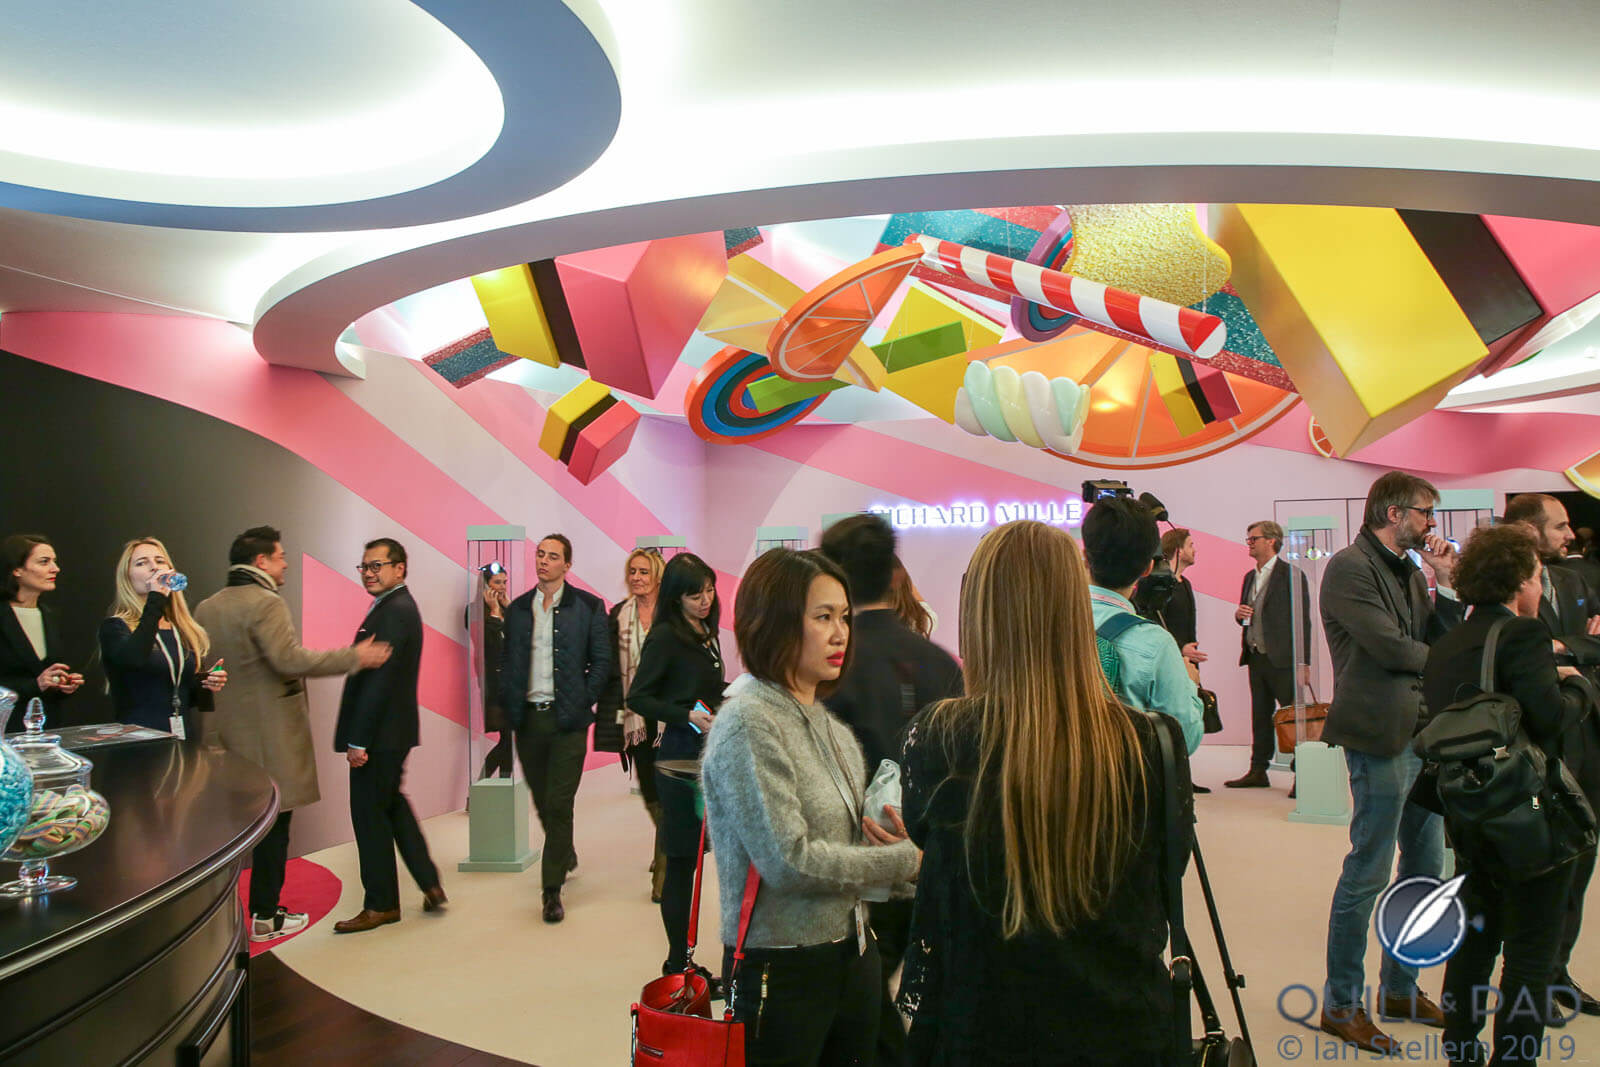 Candy-themed Richard Mille stand at the 2019 SIHH